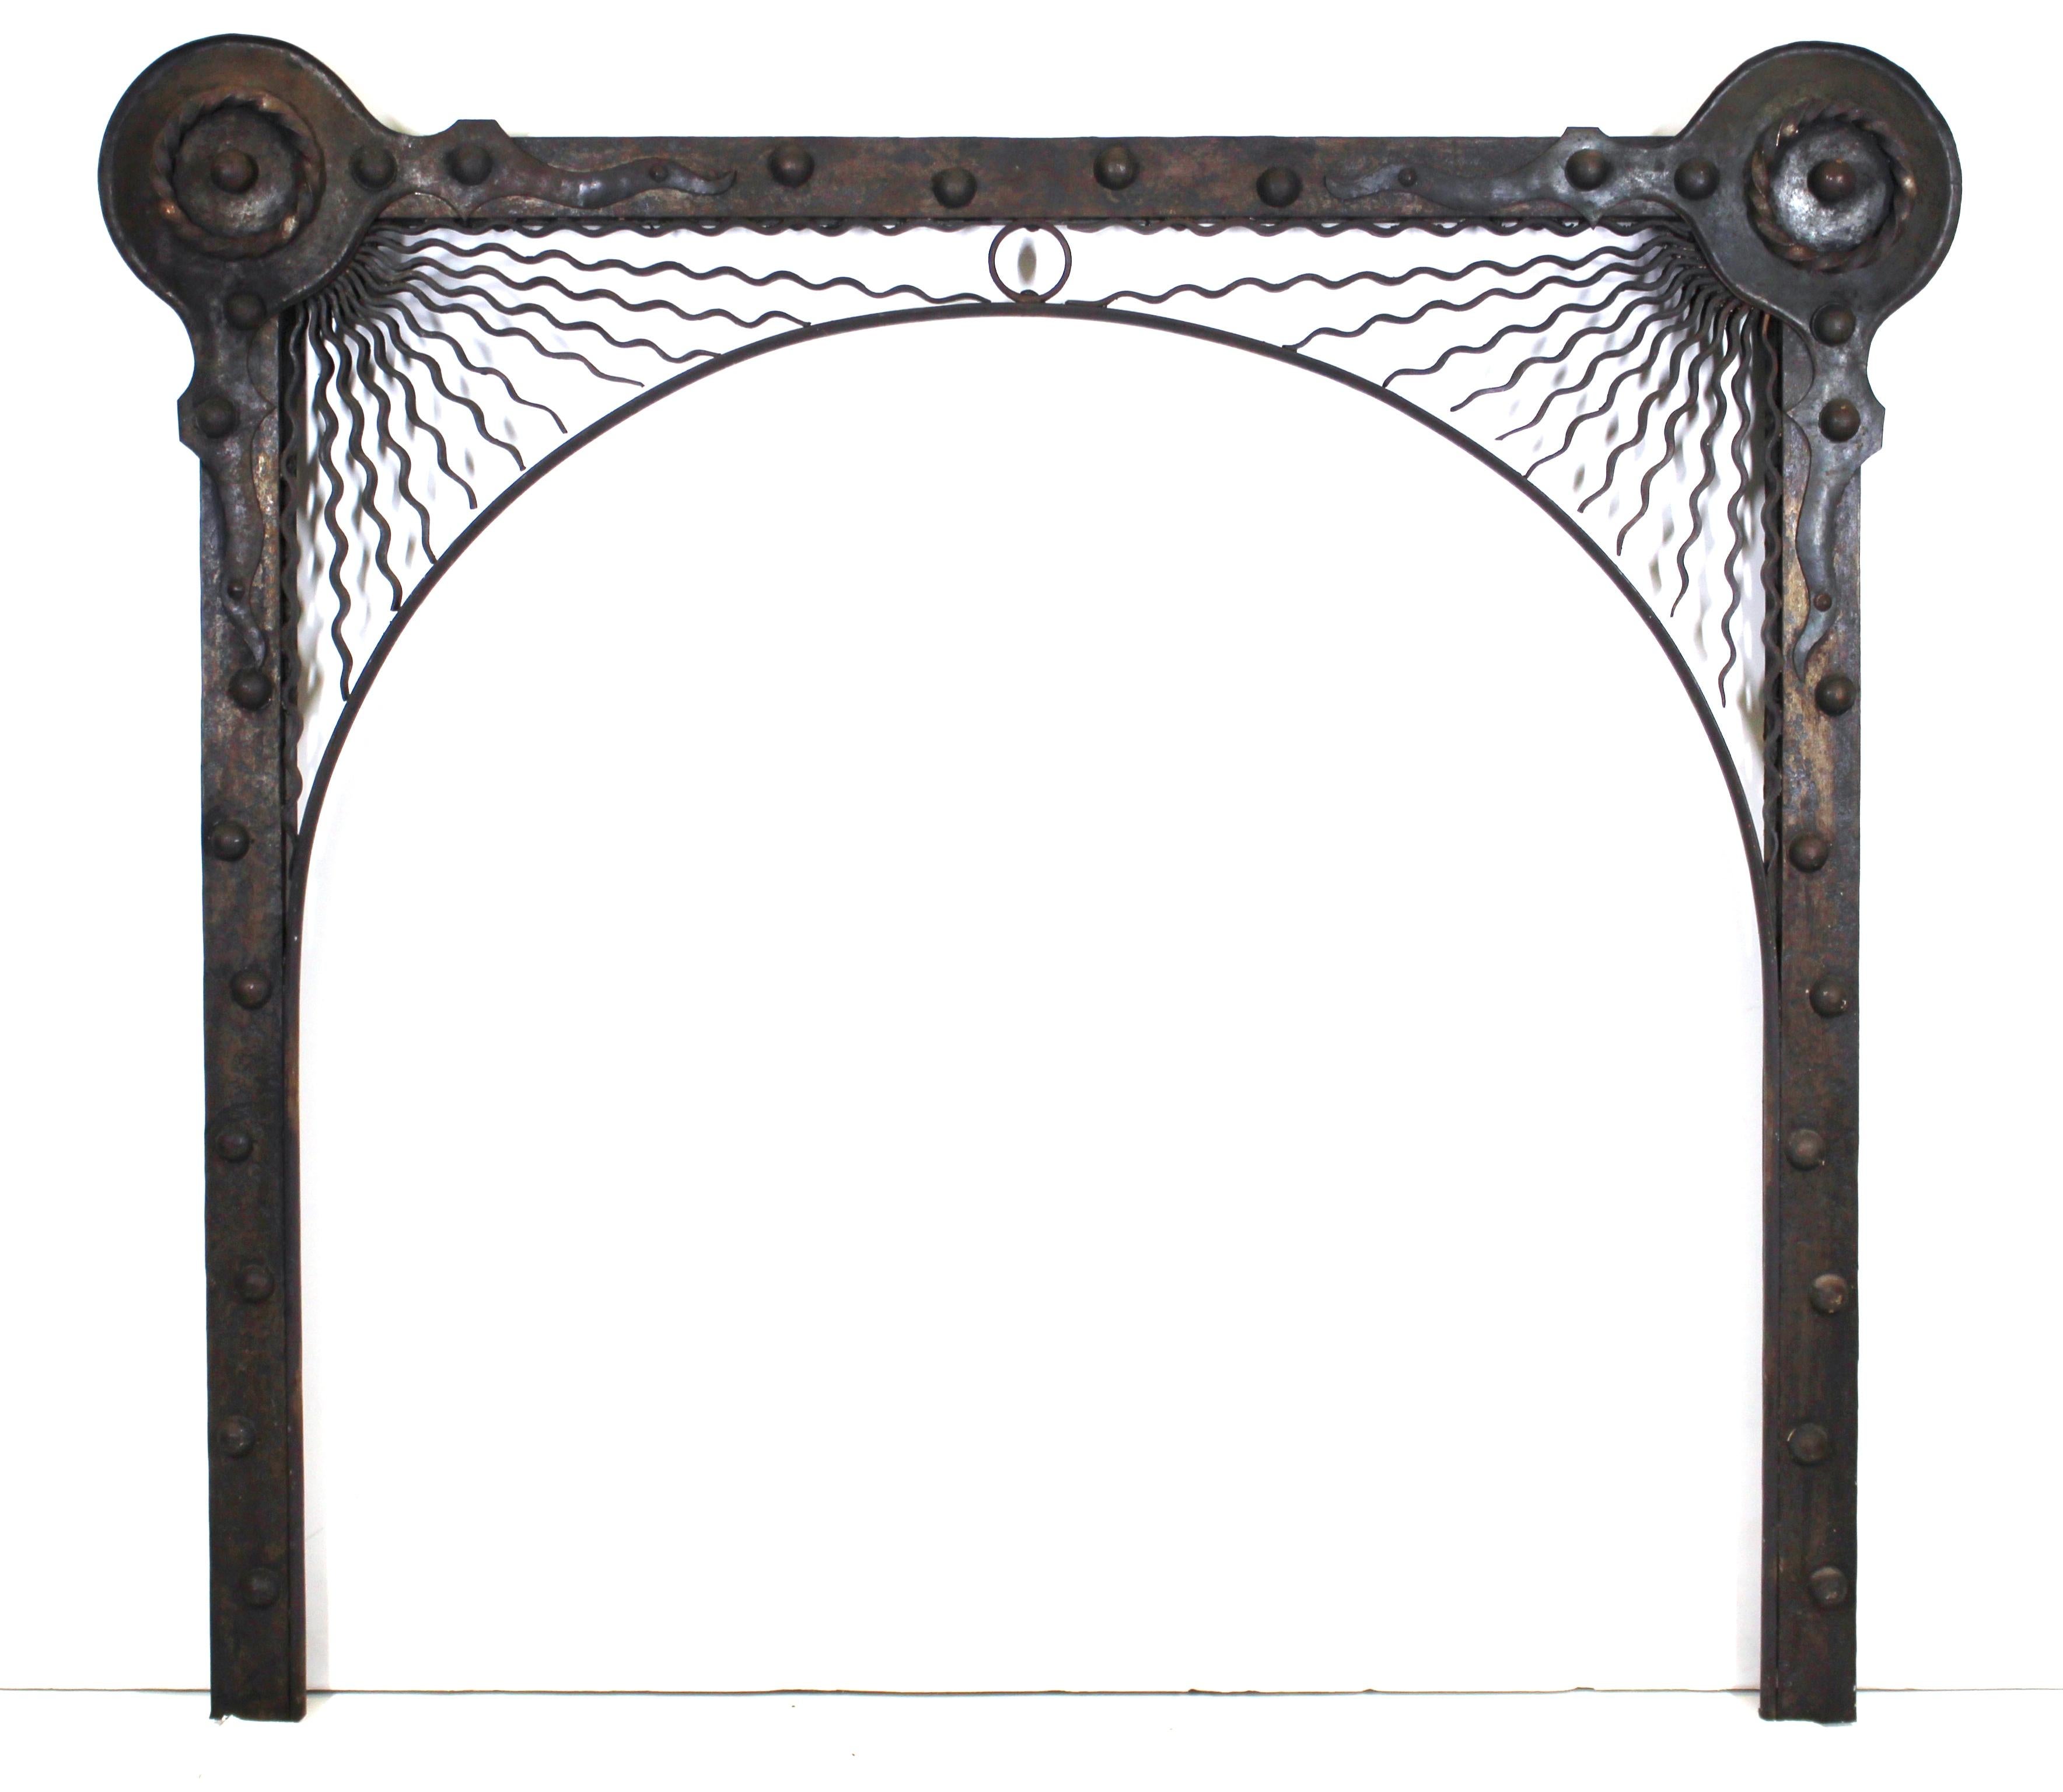 German Aesthetic Movement fireplace surround in handwrought iron. The piece features sunrays on each upper corner emanating from circular discs. Handmade in the 1880s in Germany. In remarkable antique condition with age-appropriate wear and use.